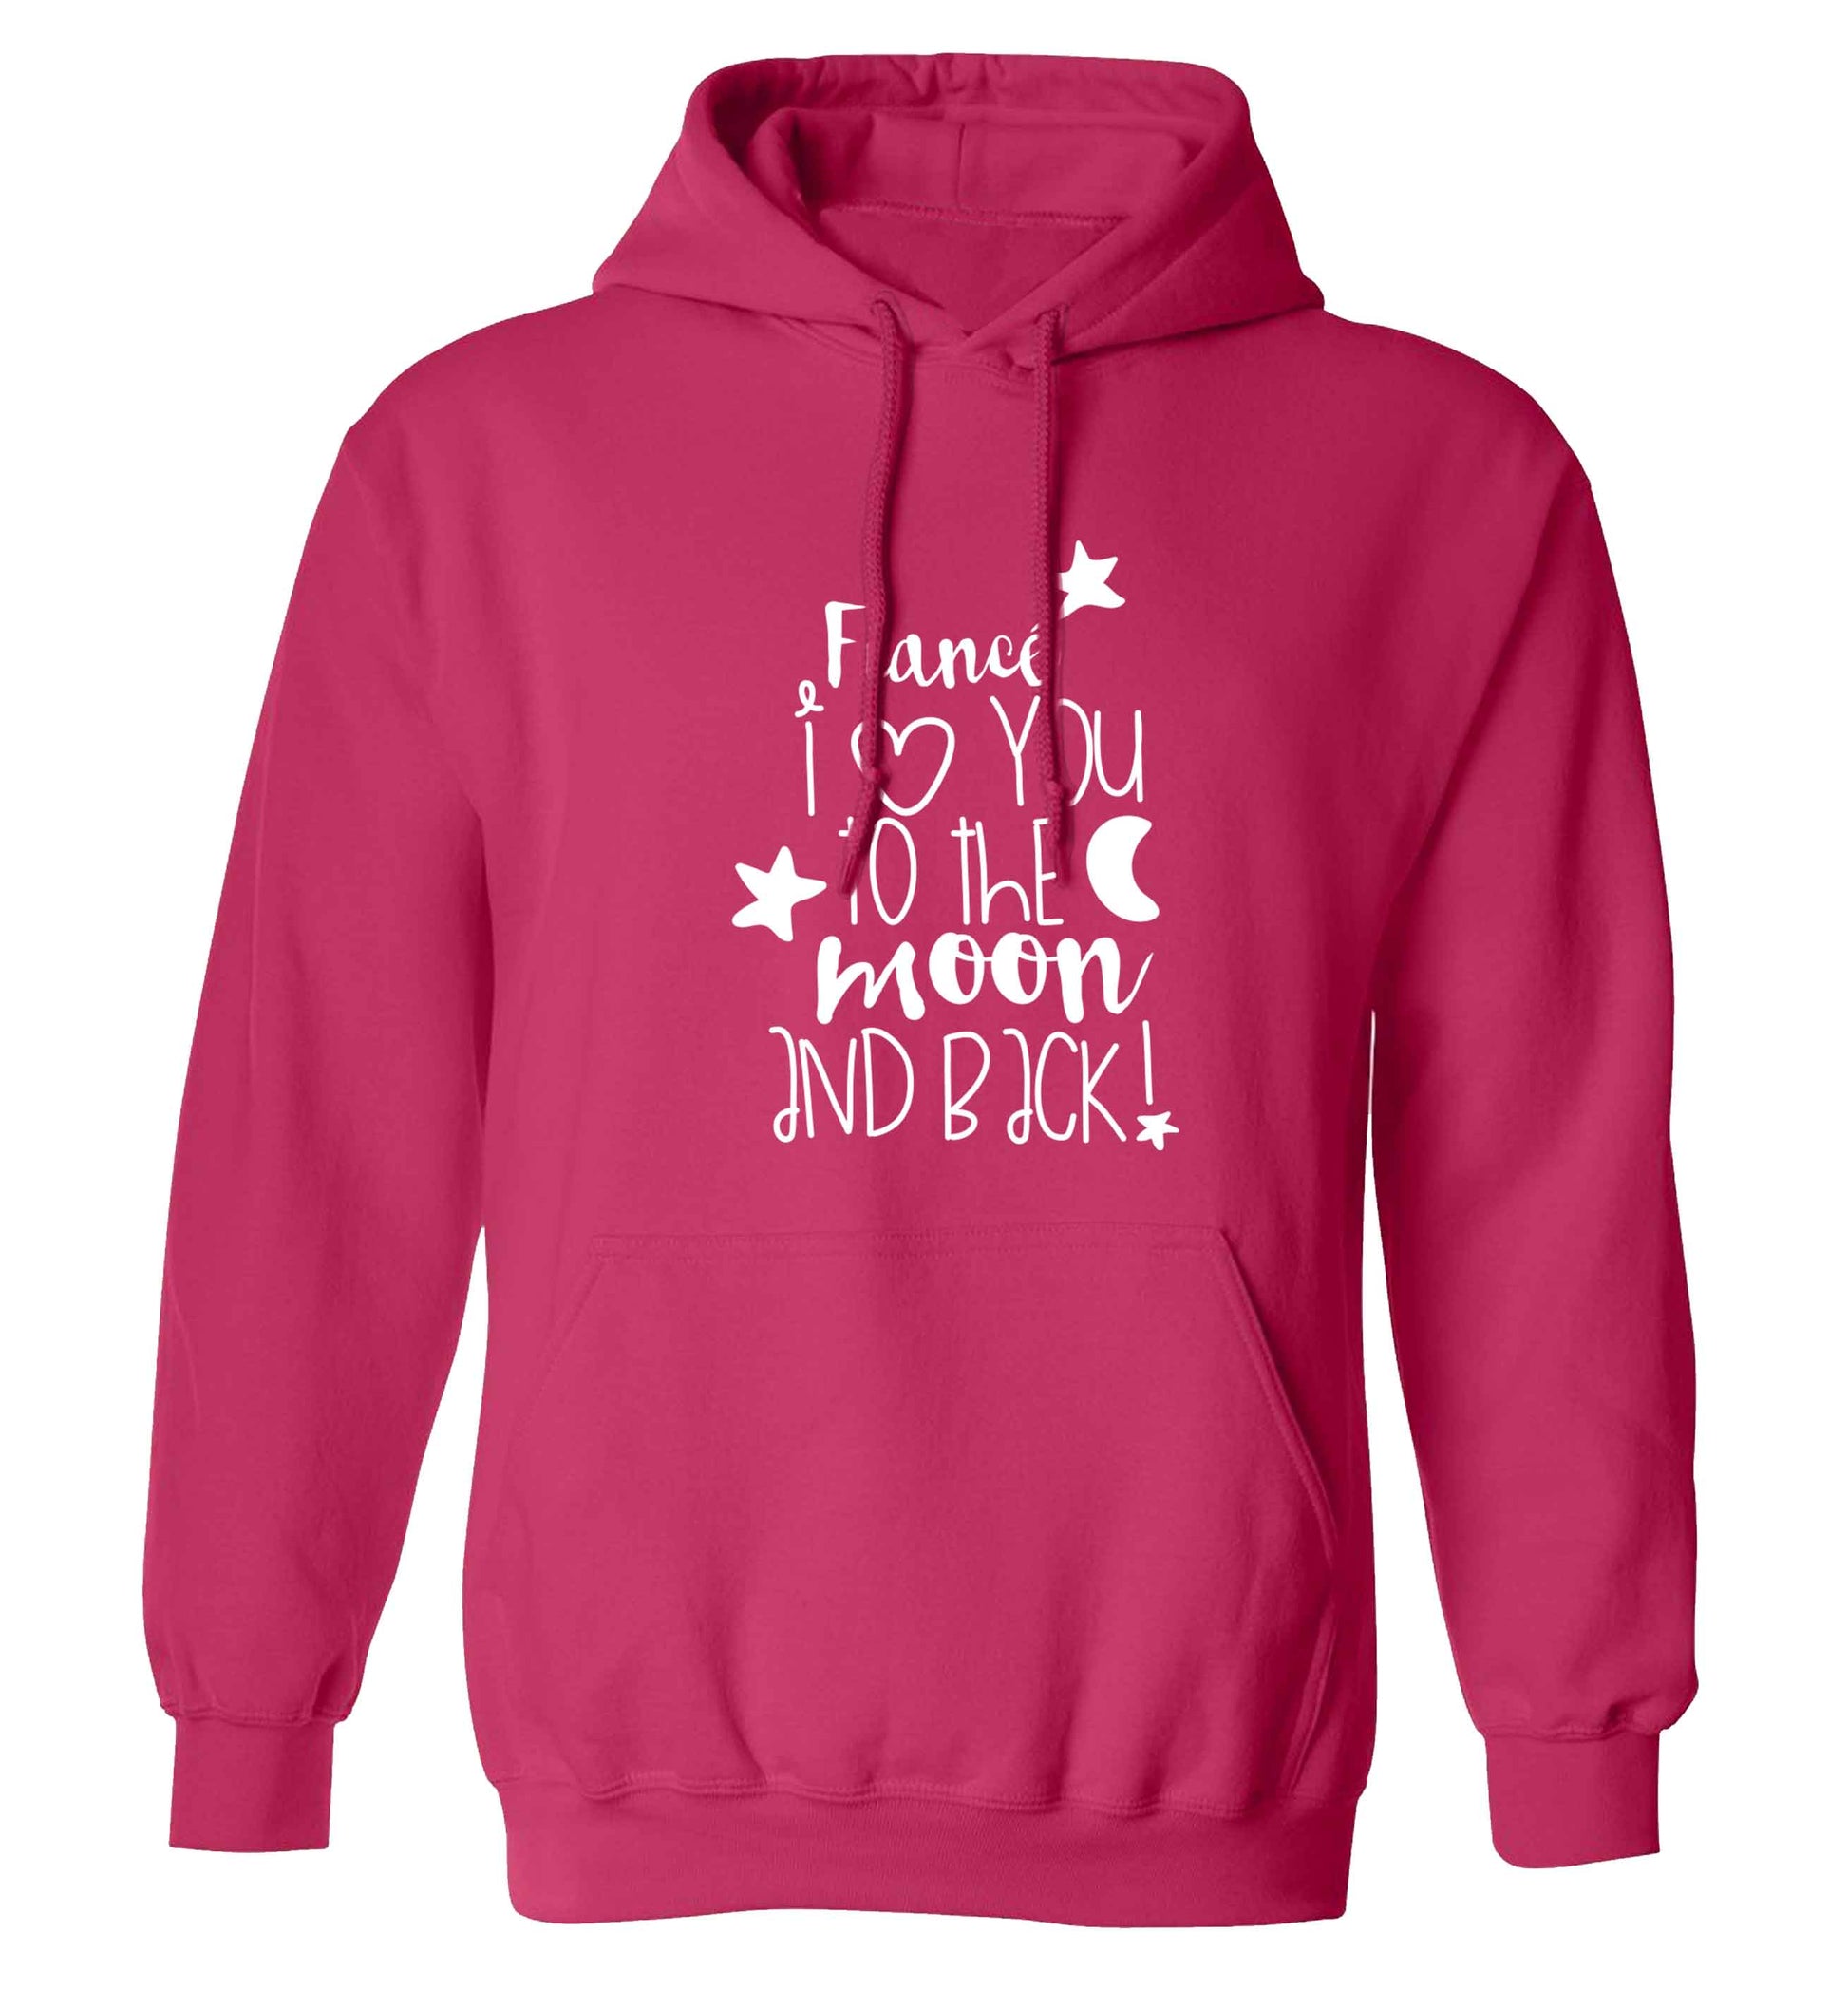 Fianc√© I love you to the moon and back adults unisex pink hoodie 2XL